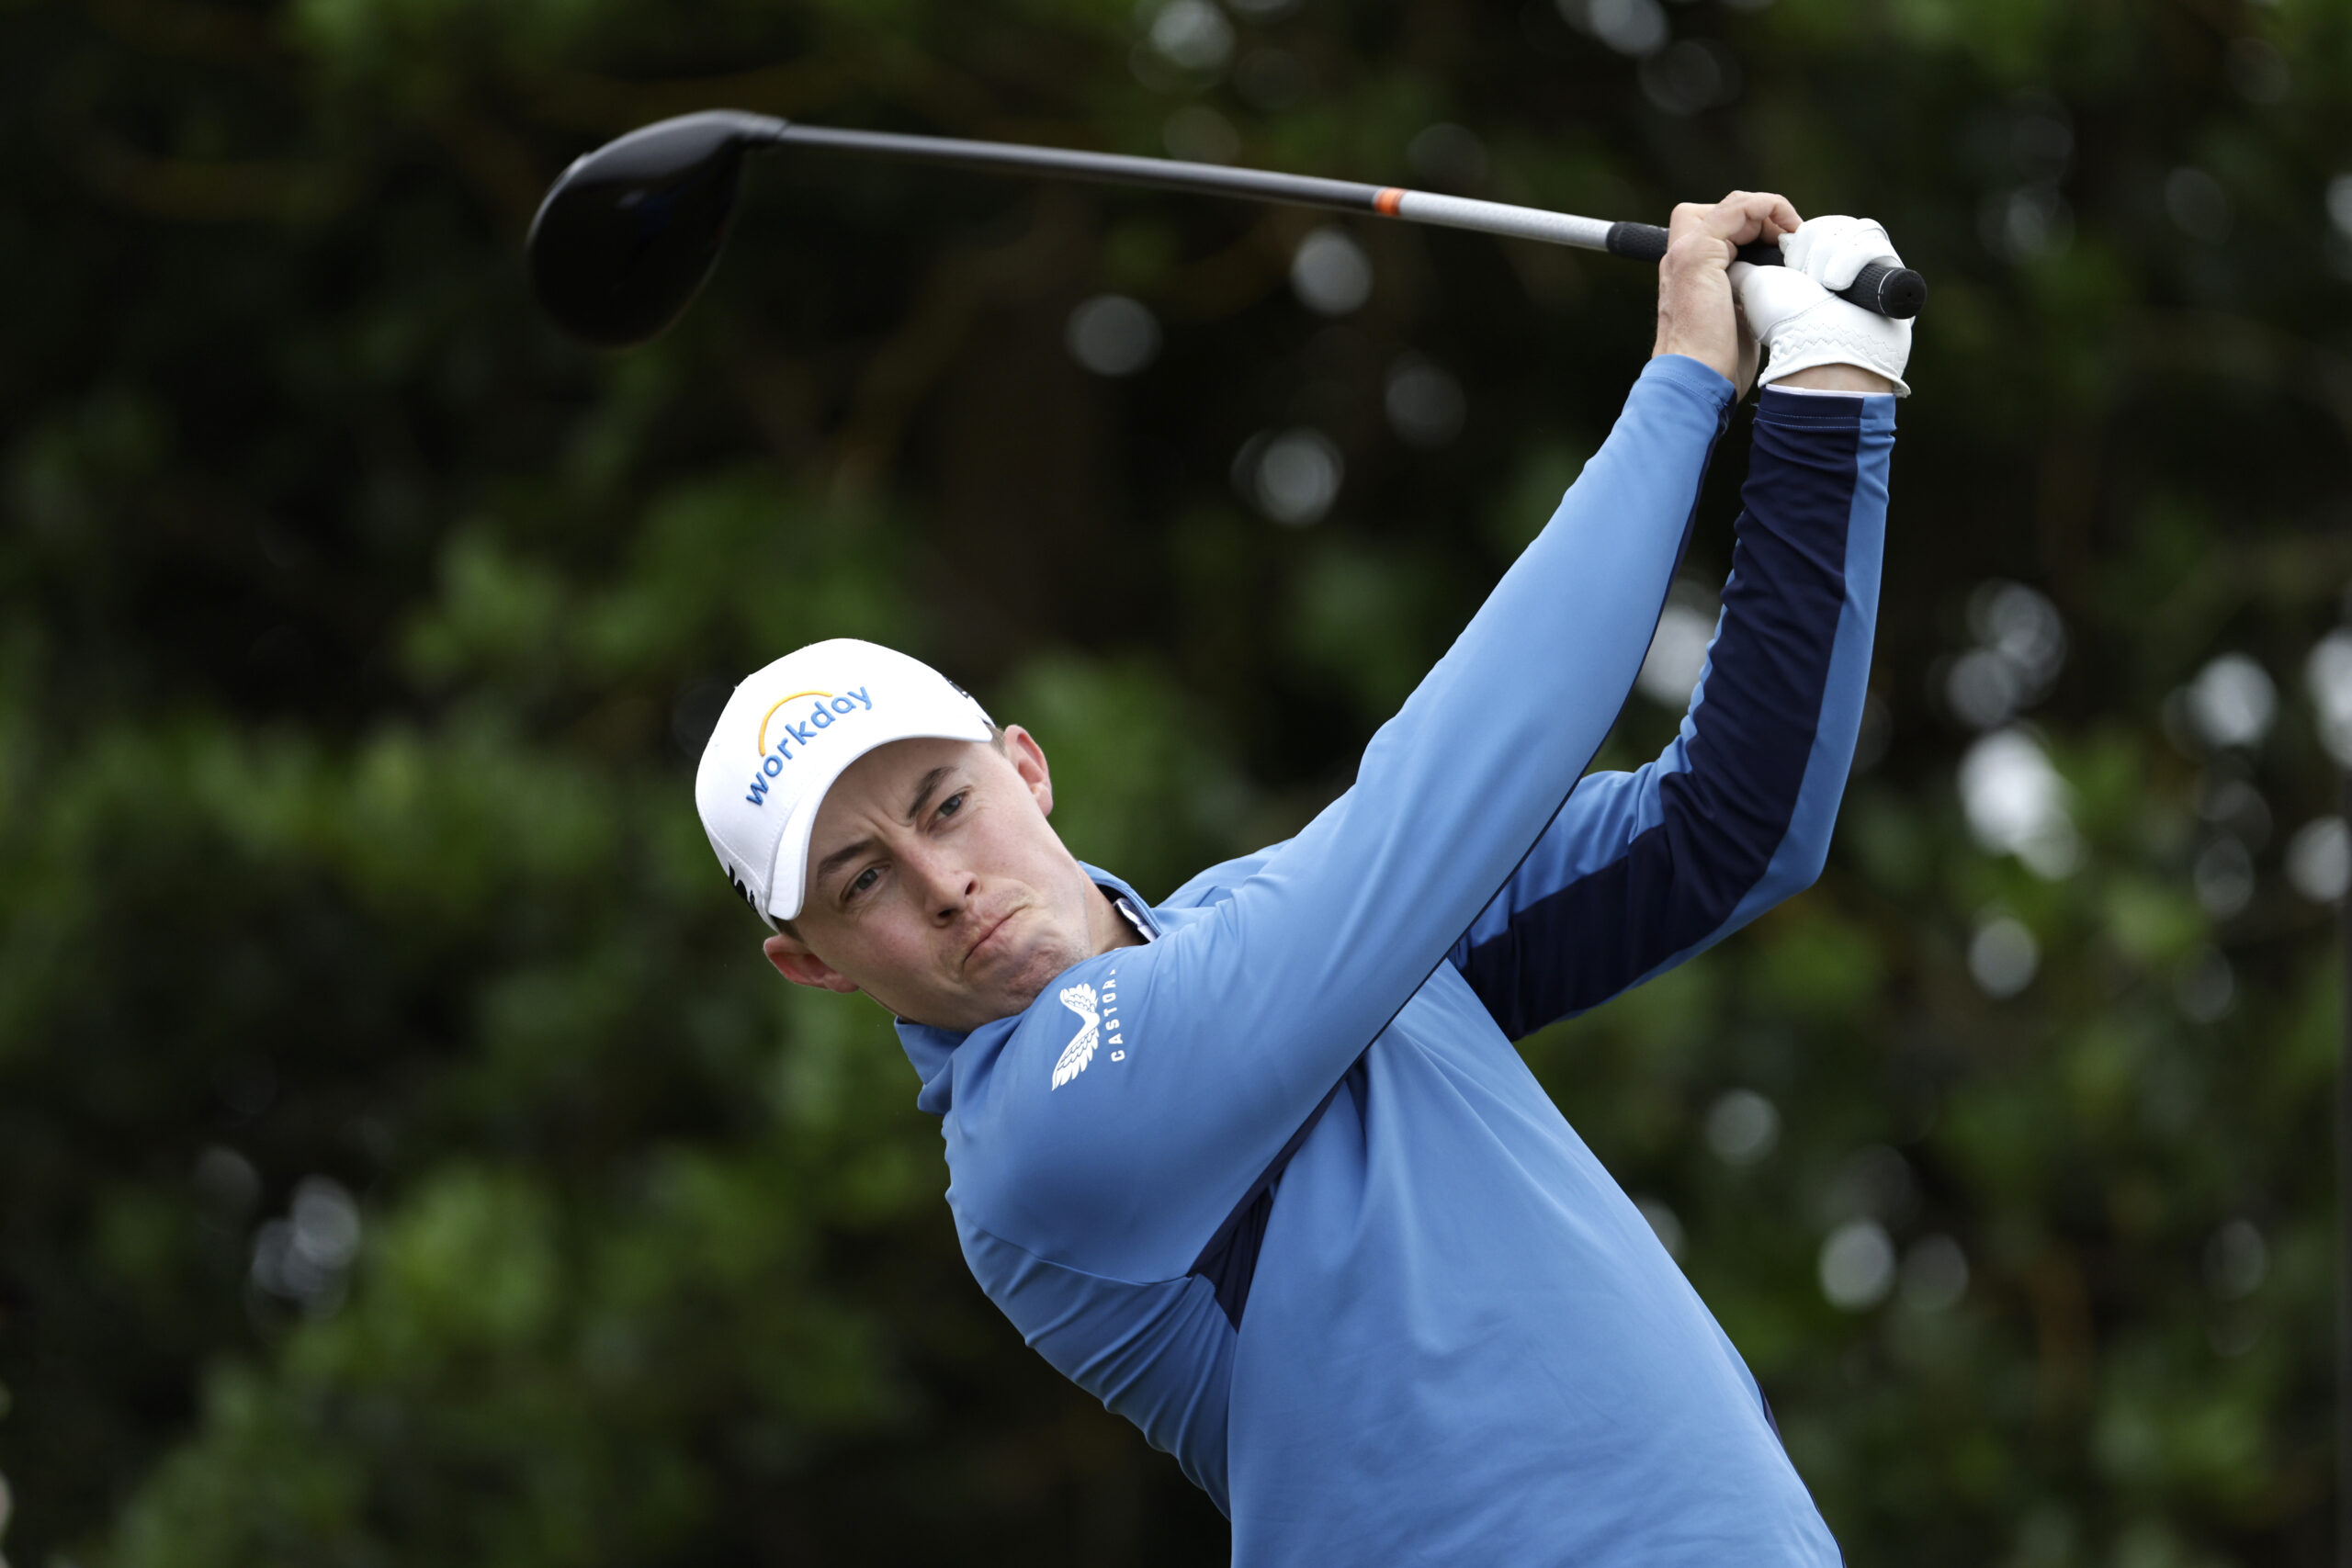 Matt Fitzpatrick finished the first day of the Canadian Open